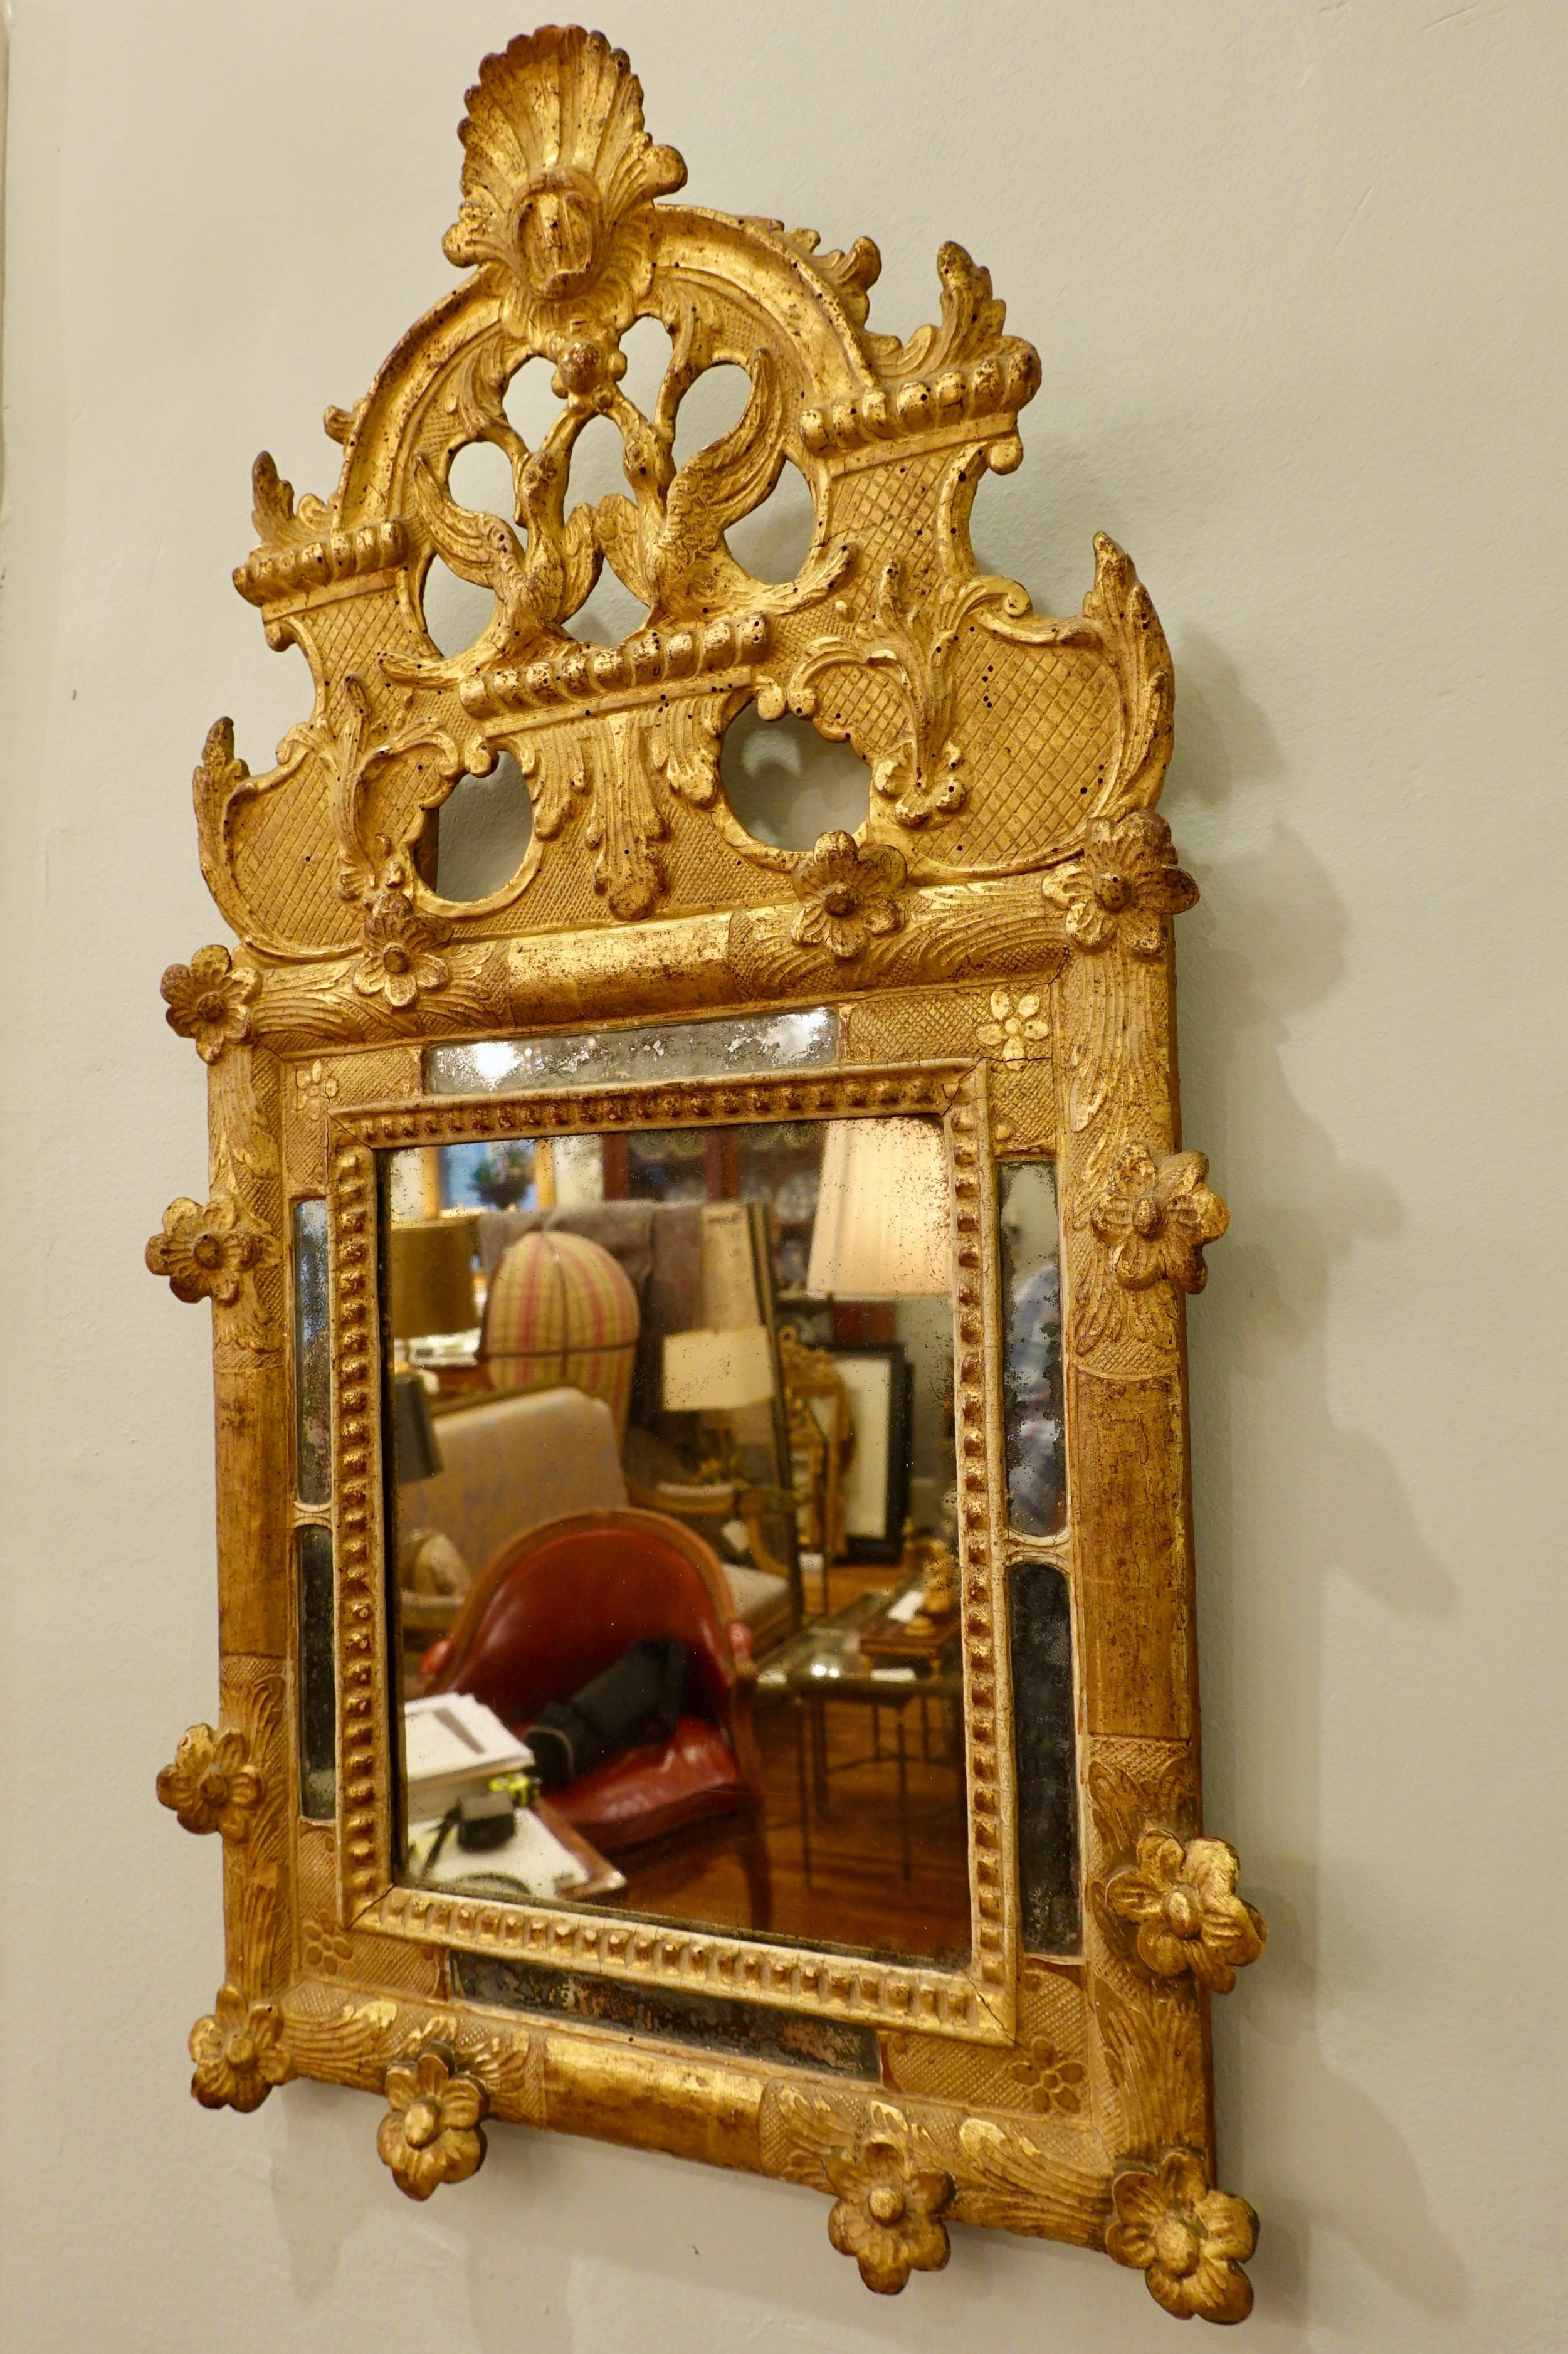 Régence French Regence Period Giltwood Mirror with Birds, Scallop Shell and Flowers For Sale